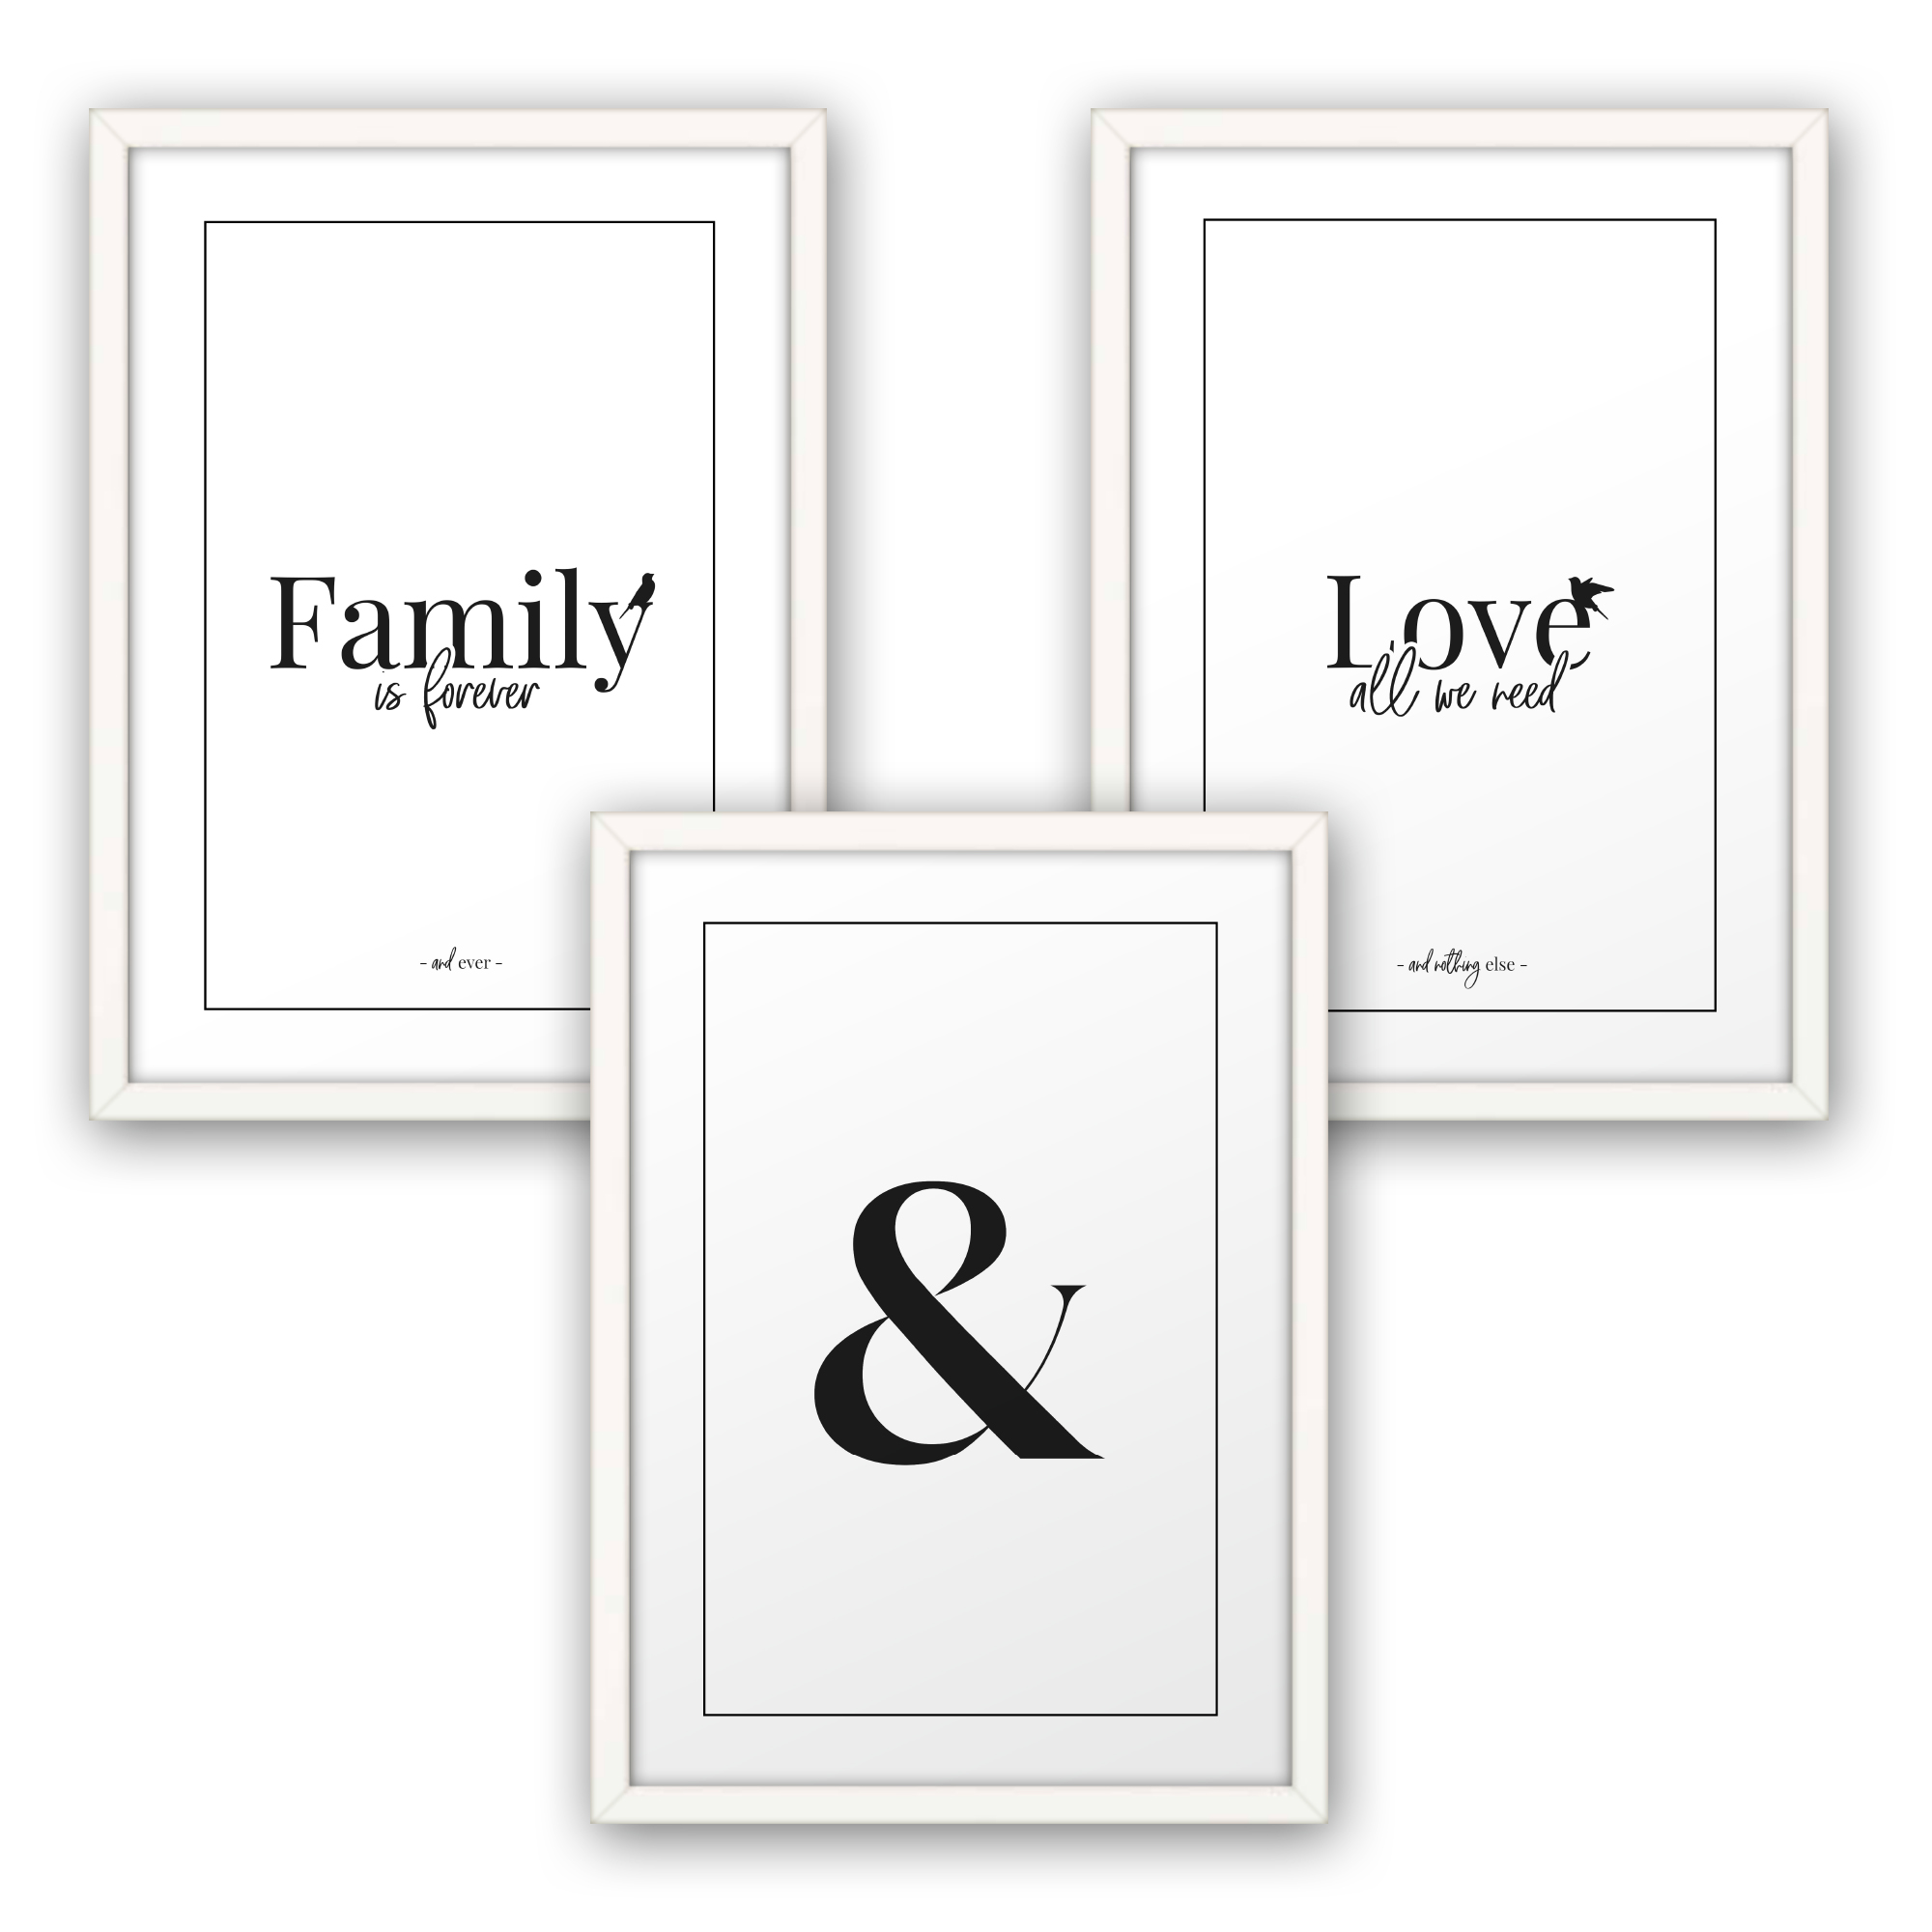 22-teiliges Poster-Set  Family & Love  optional mit Rahmen  DIN A22 oder A22 With Free Tent Card Template Downloads